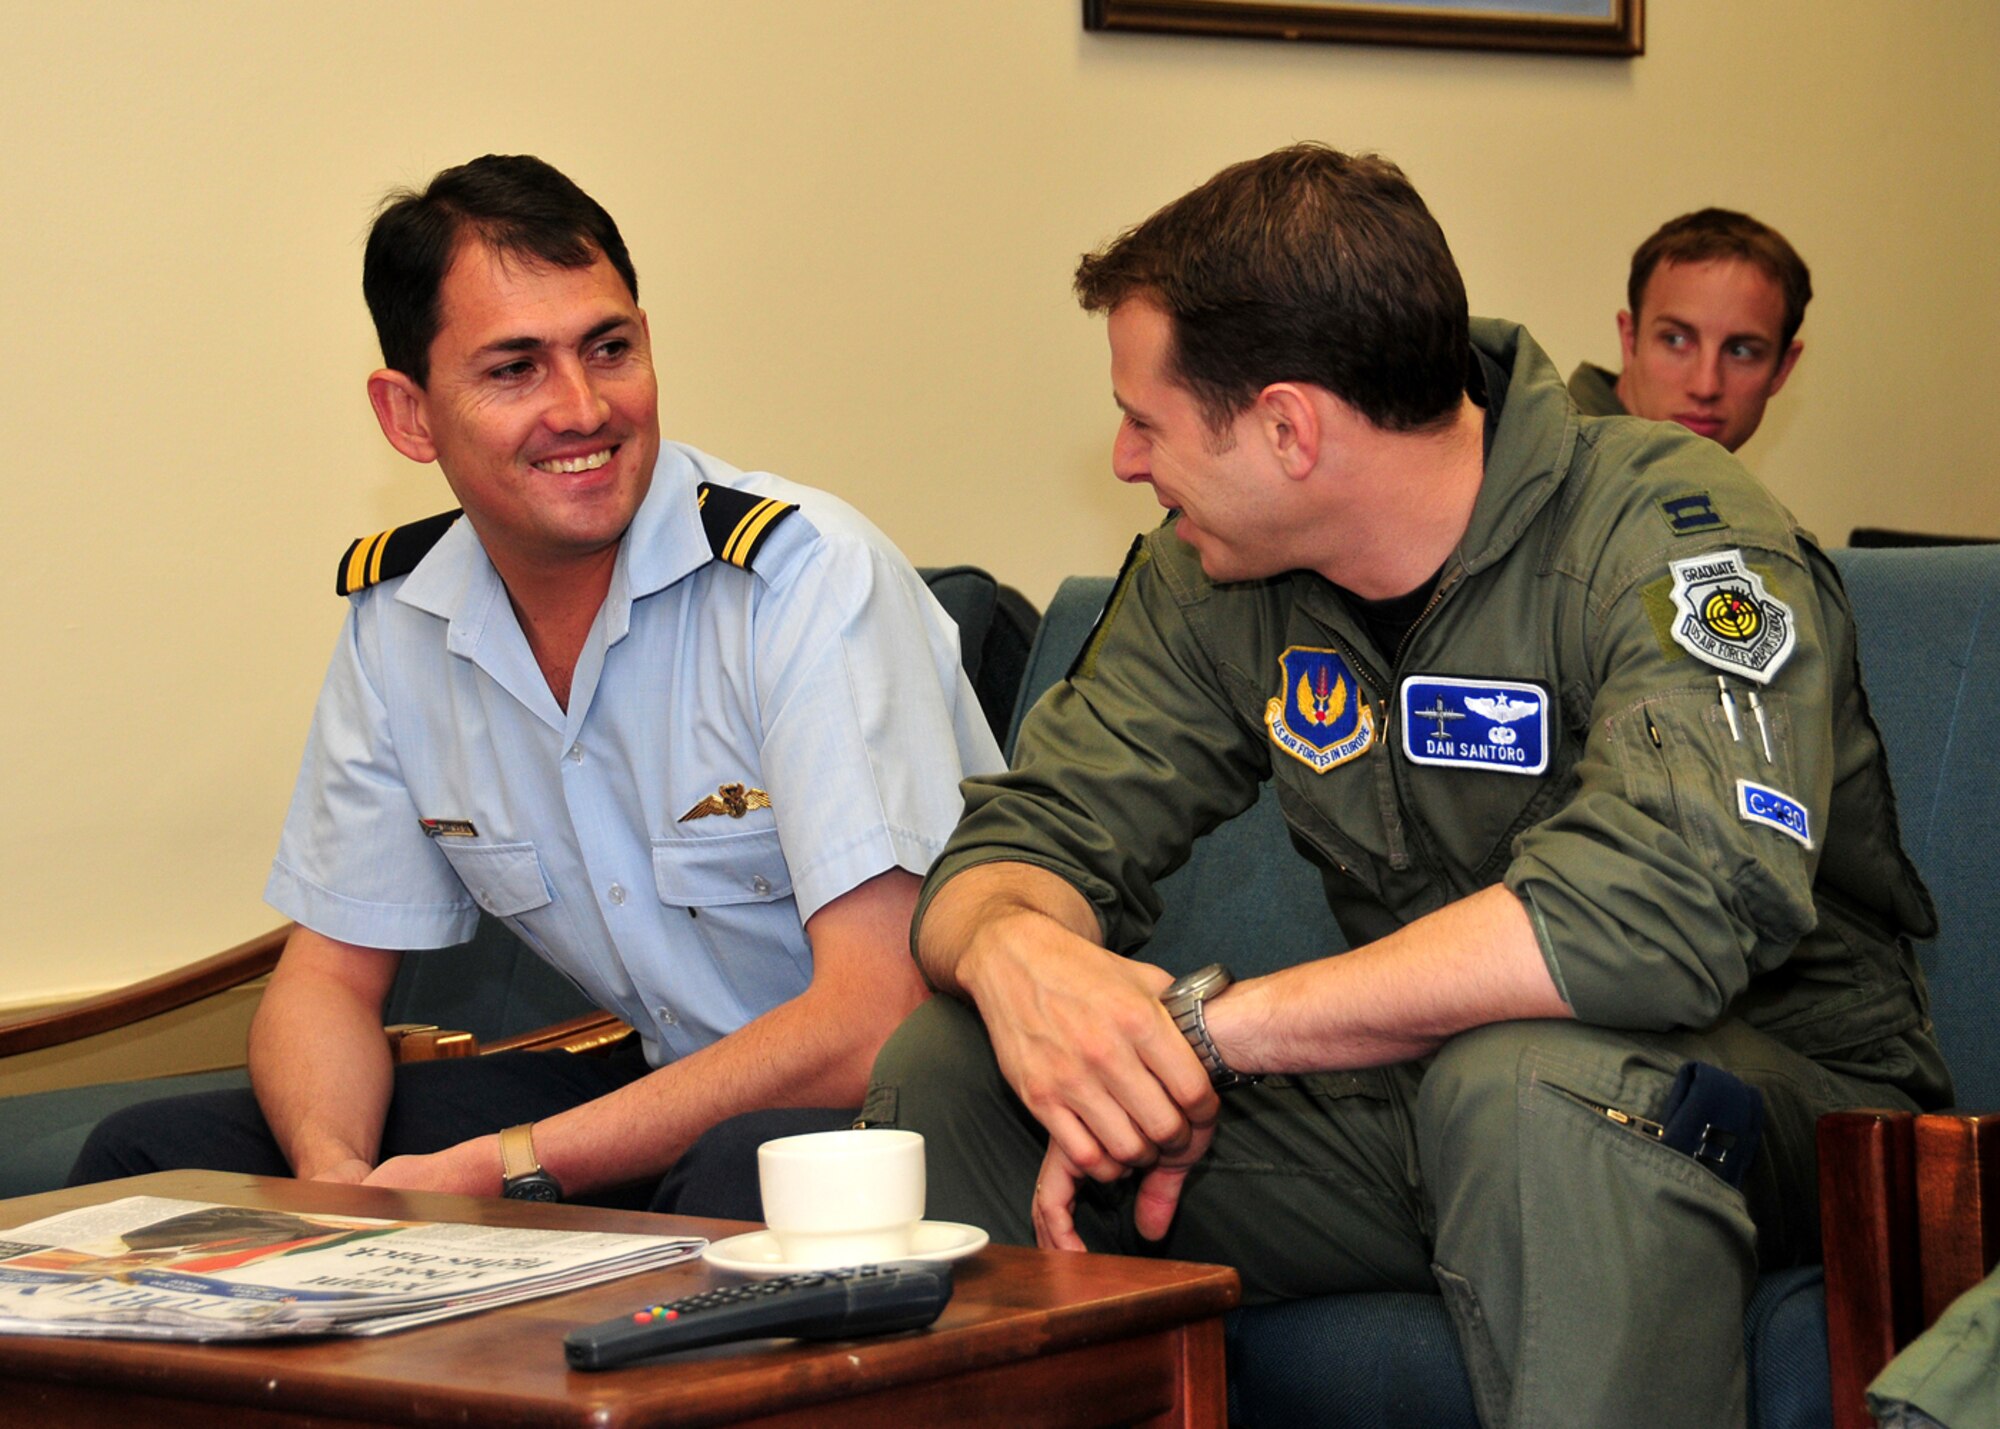 United States Air Force Capt. Dan Santoro, 37th Airlift Squadron C-130 pilot, Ramstein Air Base, Germany, shares some thoughts with one of his South African Air Force counter parts, Ysterplaat Air Force Base, South Africa, Sept. 22, 2008. (U.S. Air Force photo by Staff Sgt. Markus Maier)(Release)